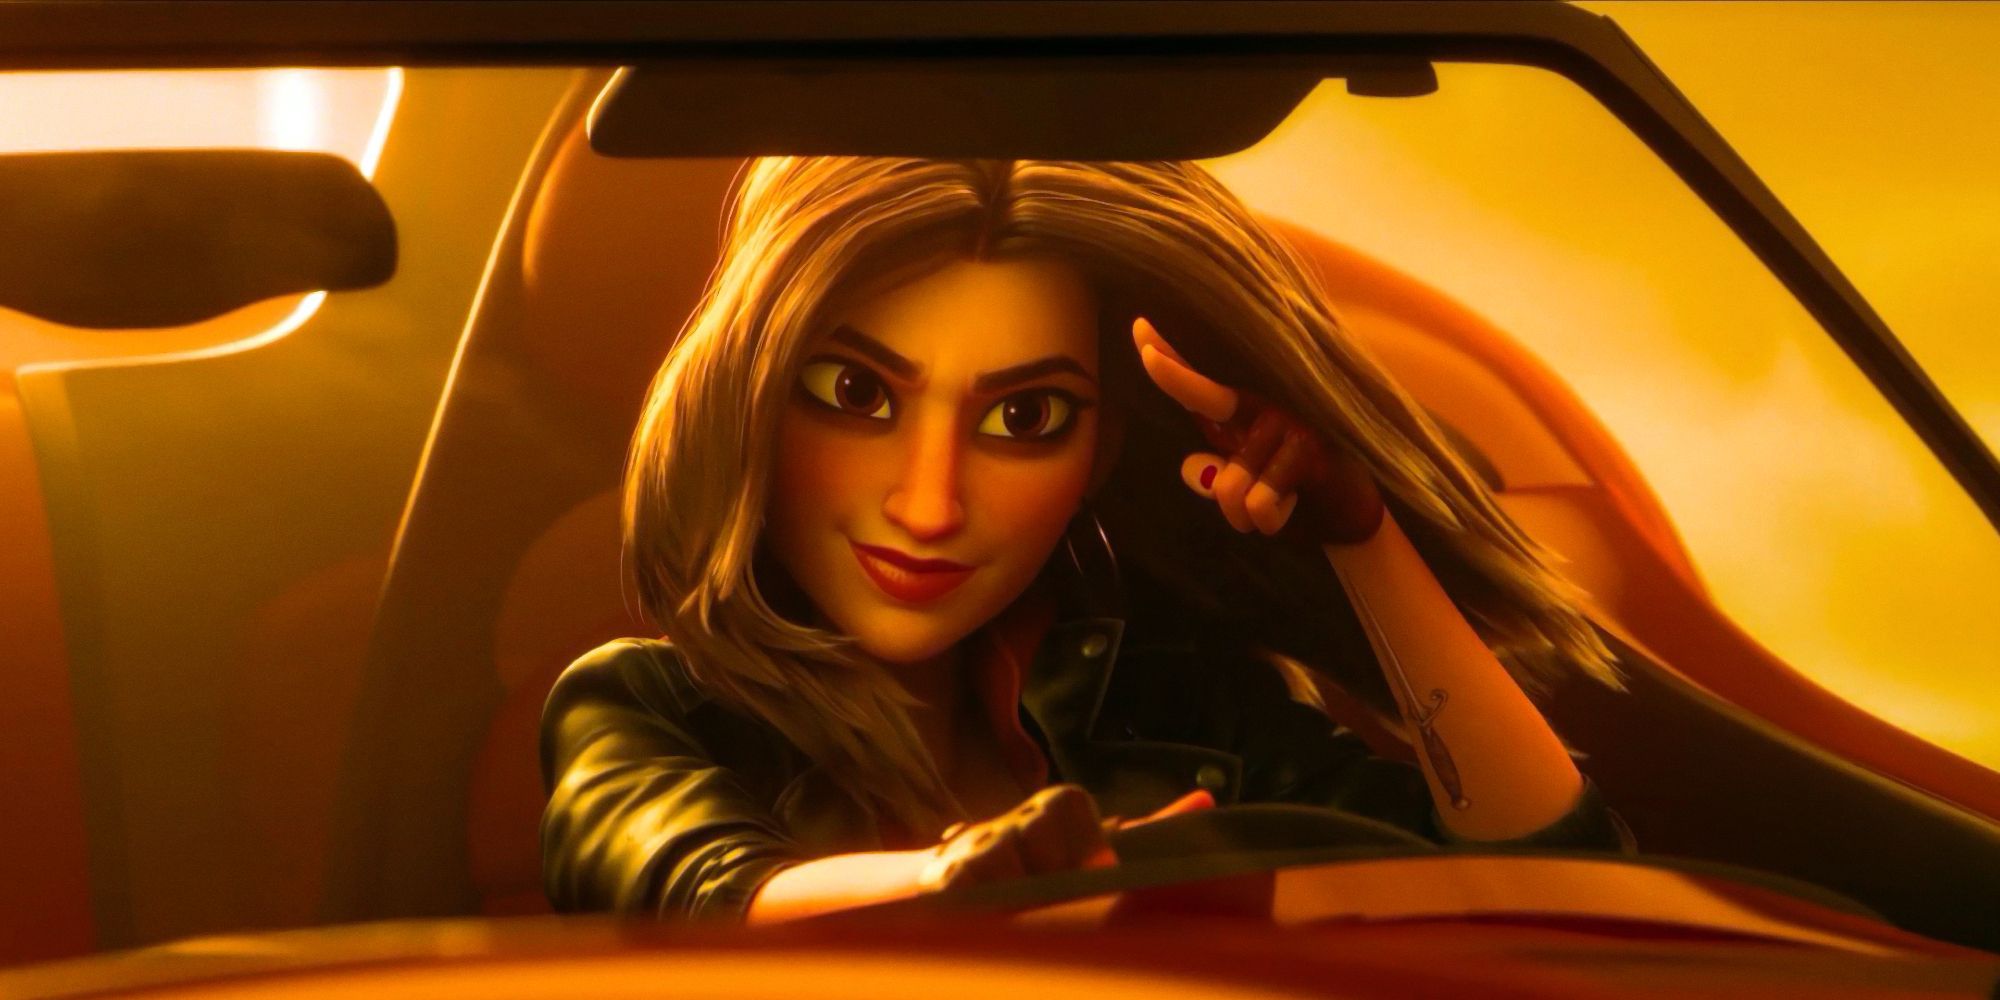 Gal Gadot’s WreckIt Ralph 2 Character Shank Is A Fast & Furious Reference